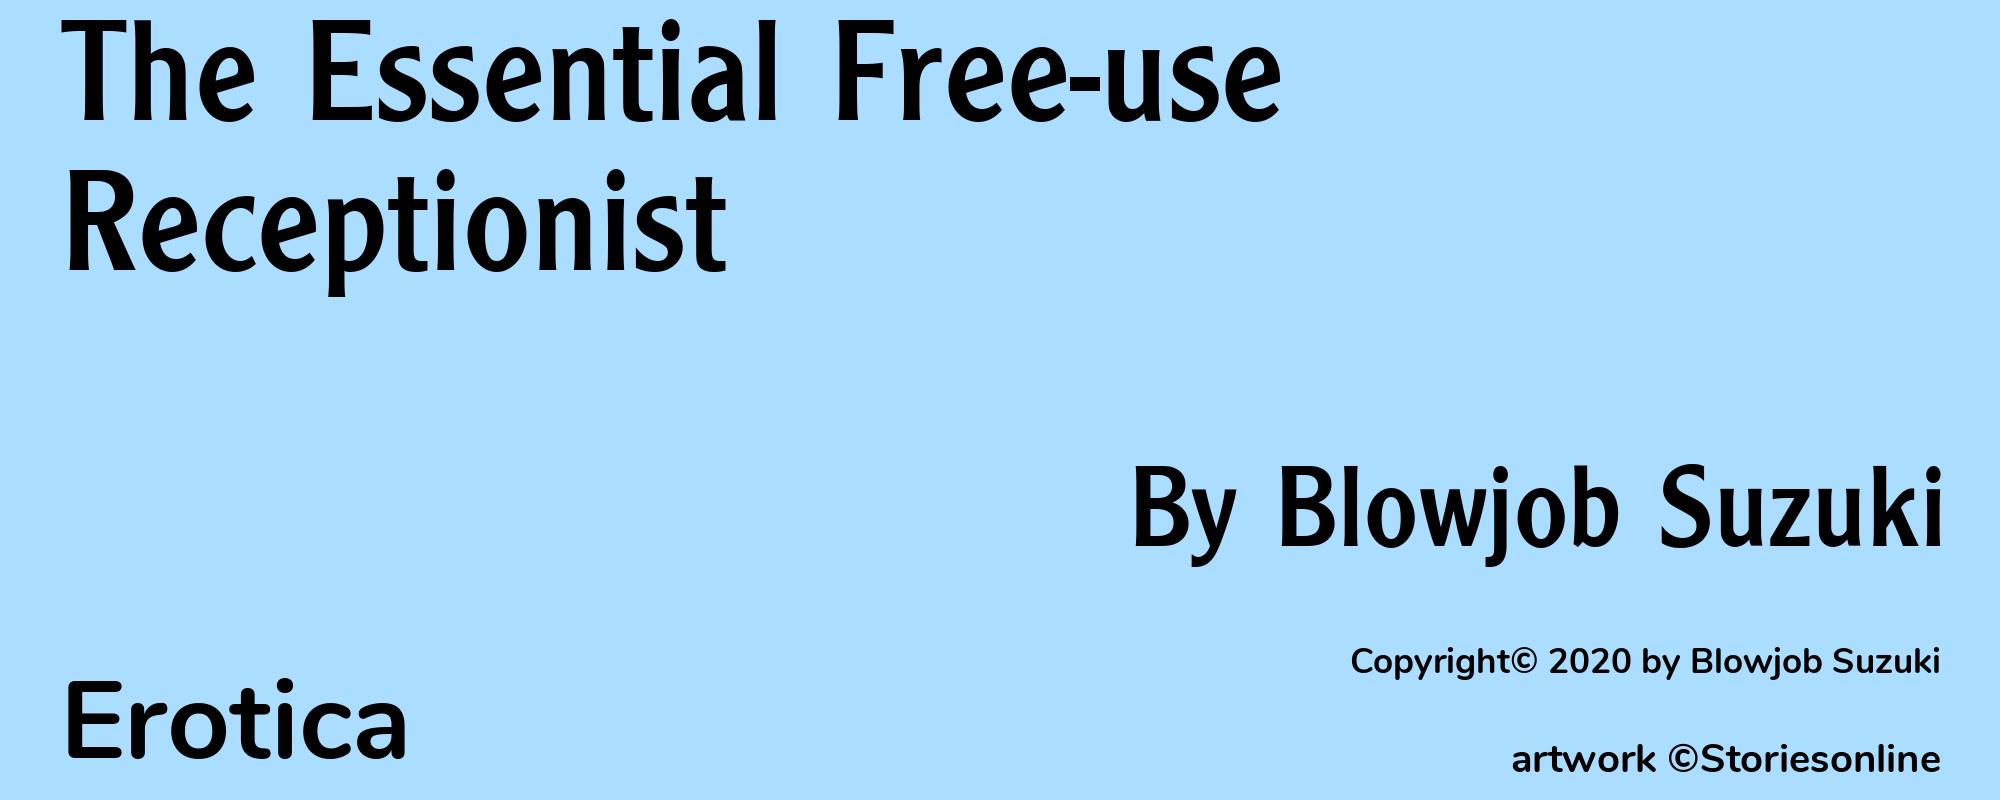 The Essential Free-use Receptionist - Cover